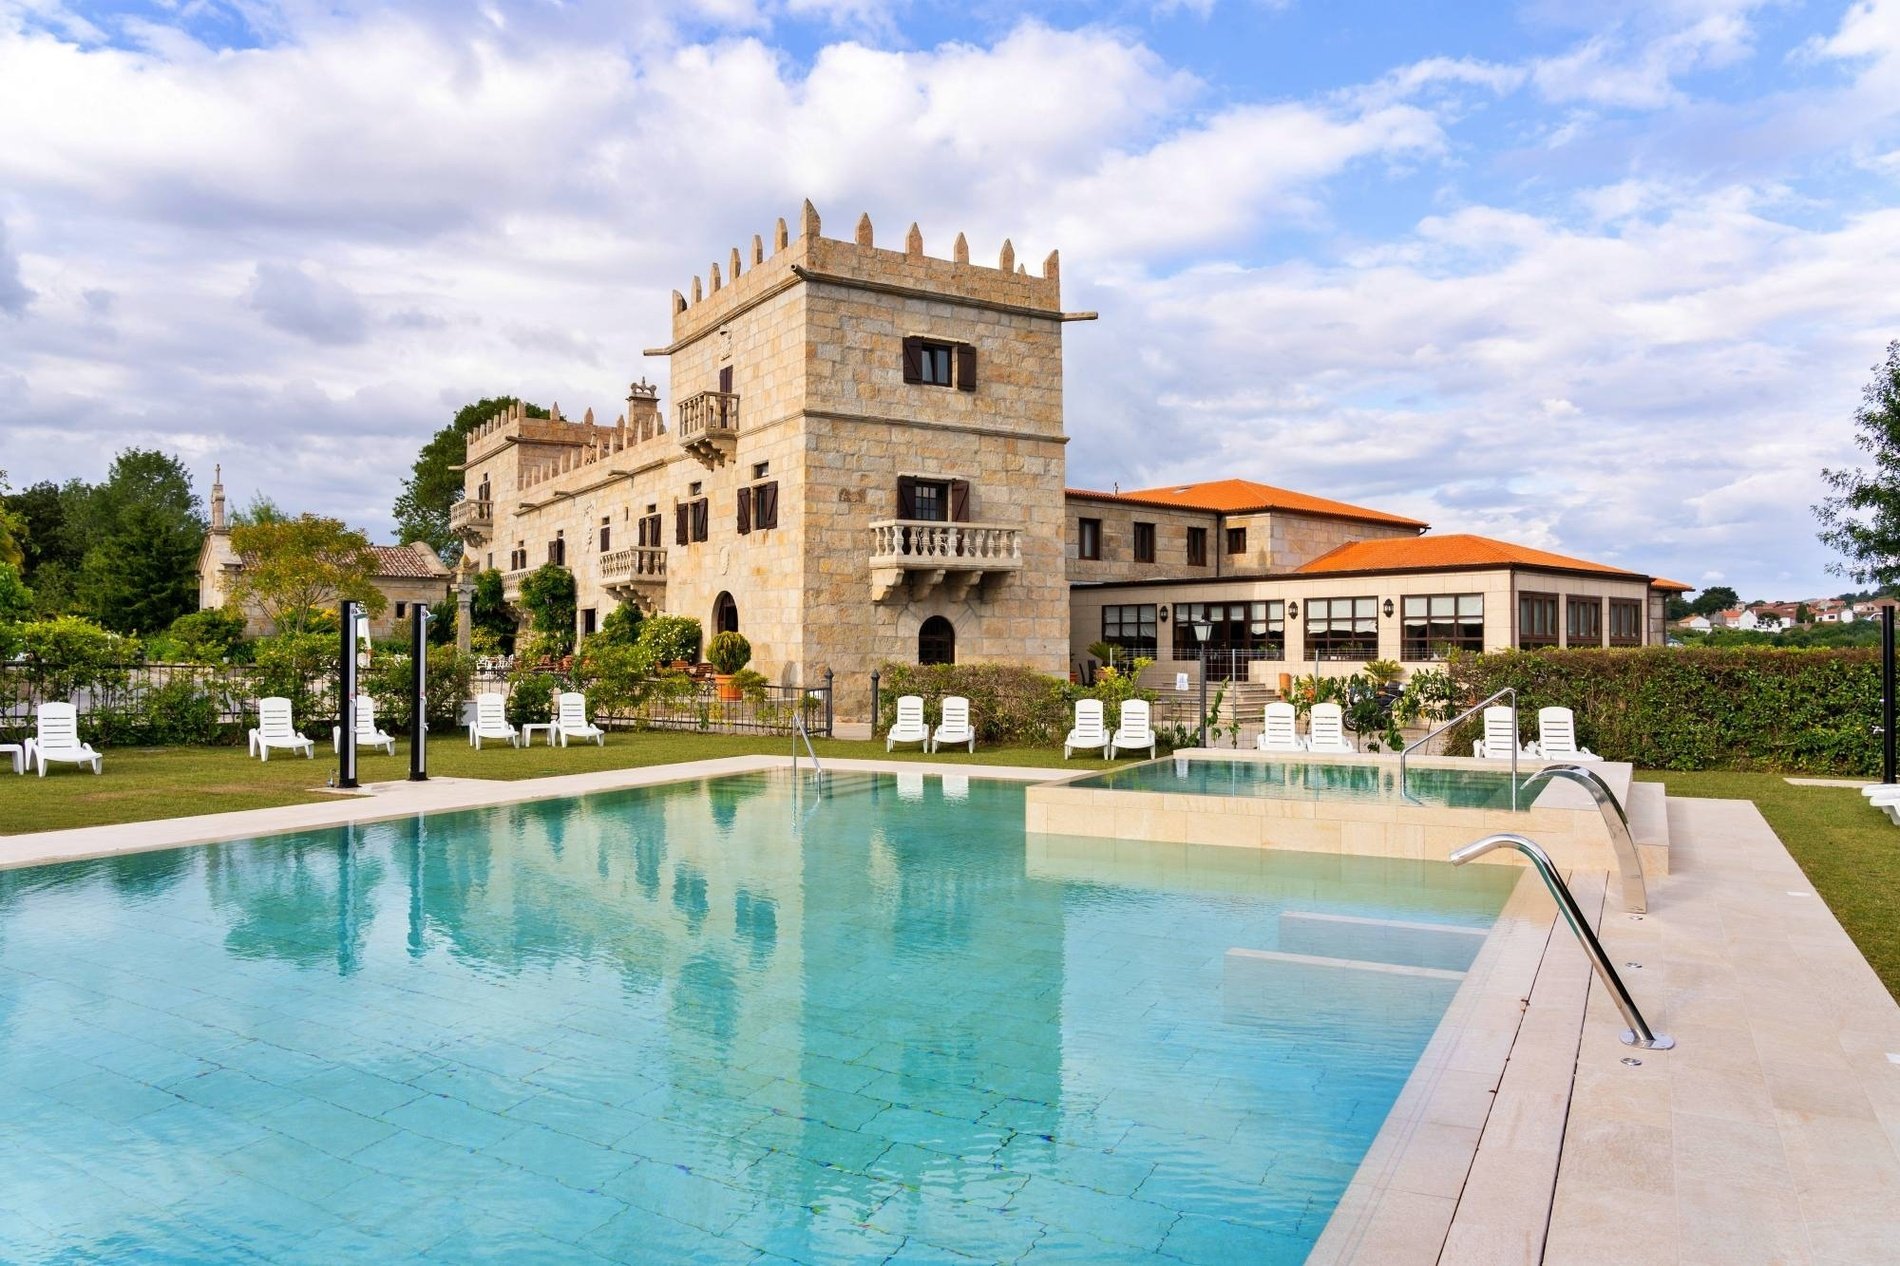 a swimming pool in front of a large stone building